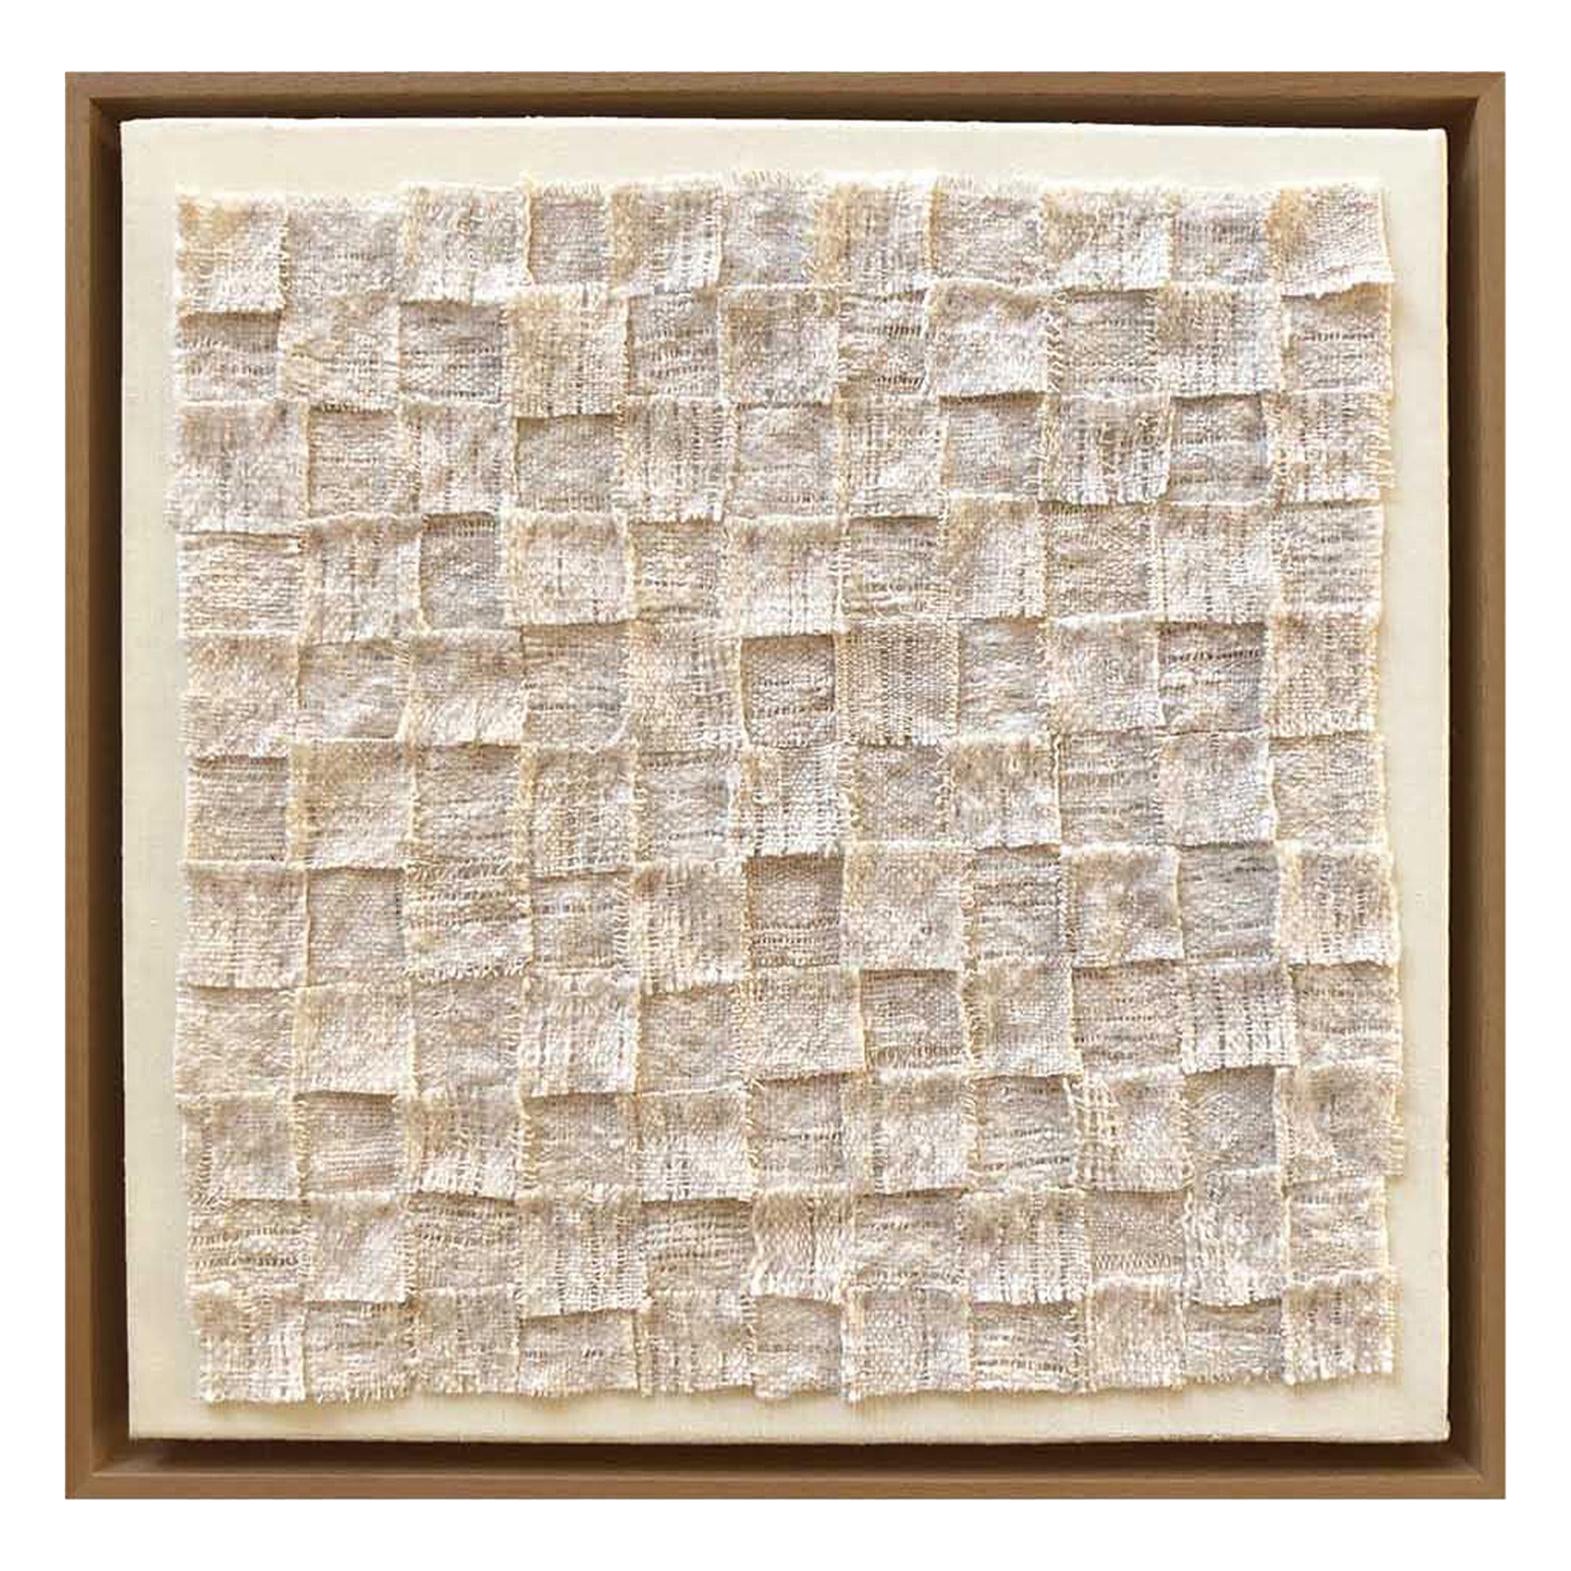 Large Size, White Textile Artwork Wall Piece, Made of handspun handwoven Wool